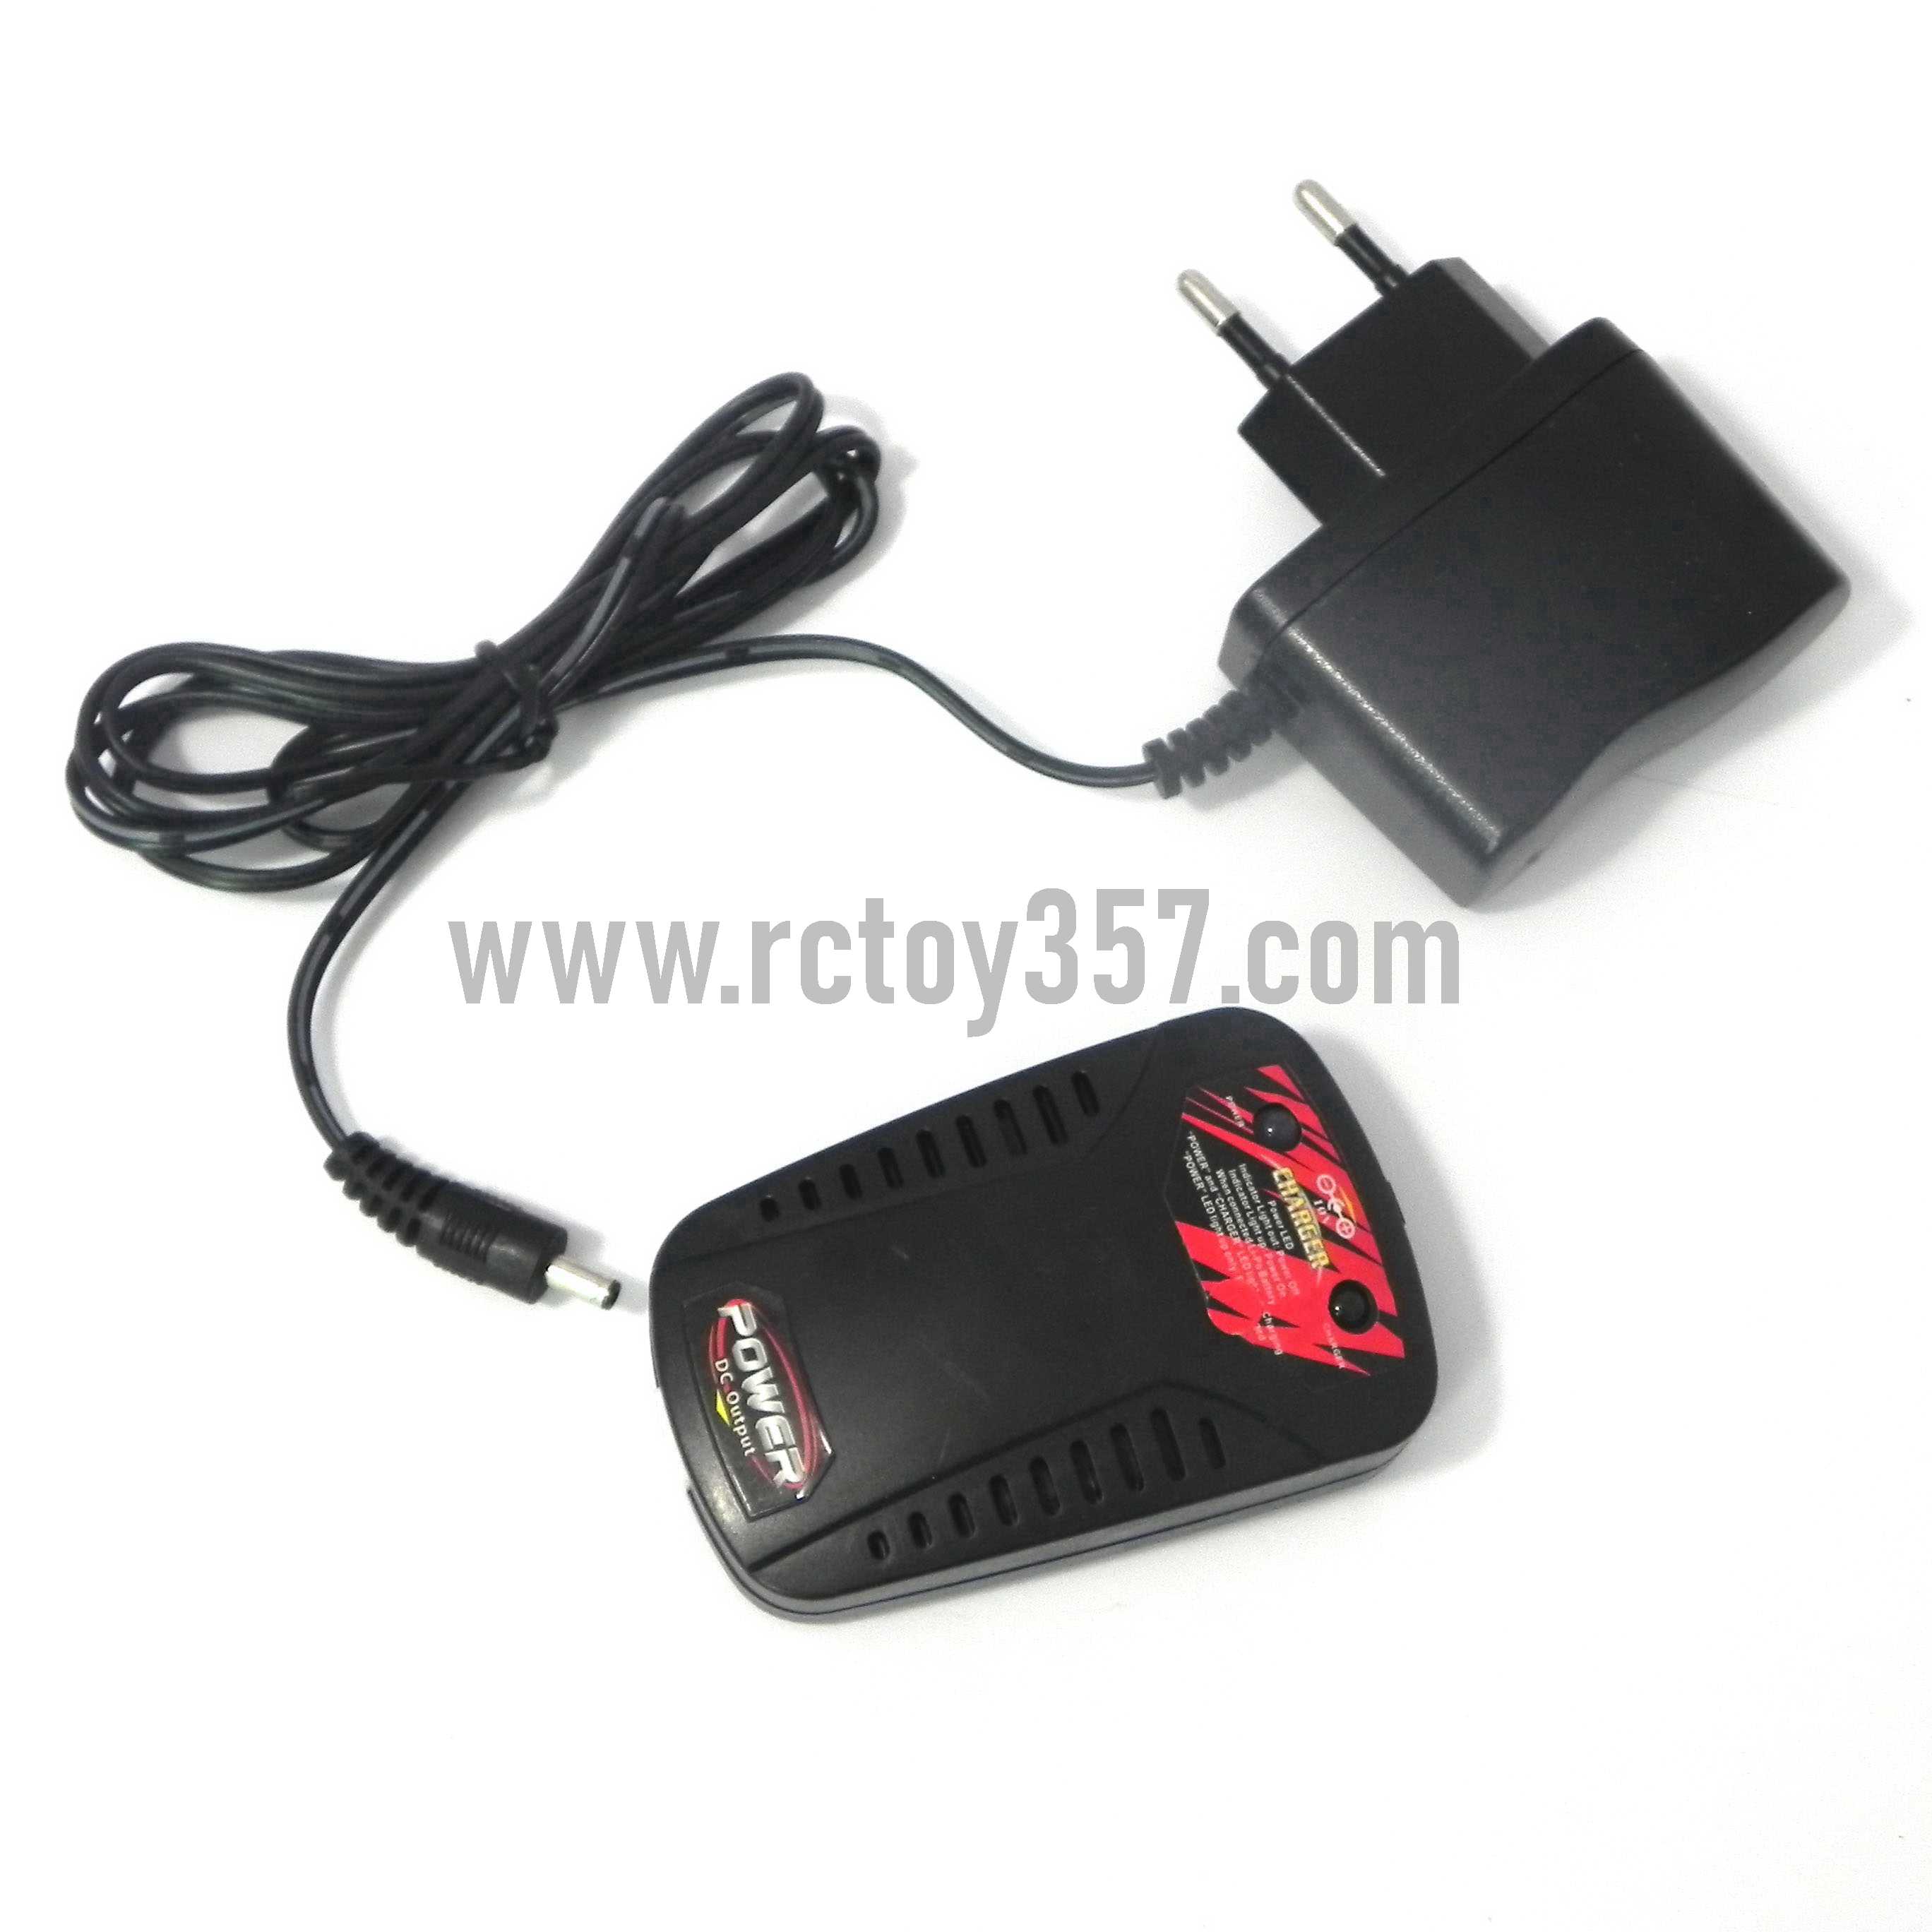 RCToy357.com - SYMA X8W Quadcopter toy Parts Charger+Charger box